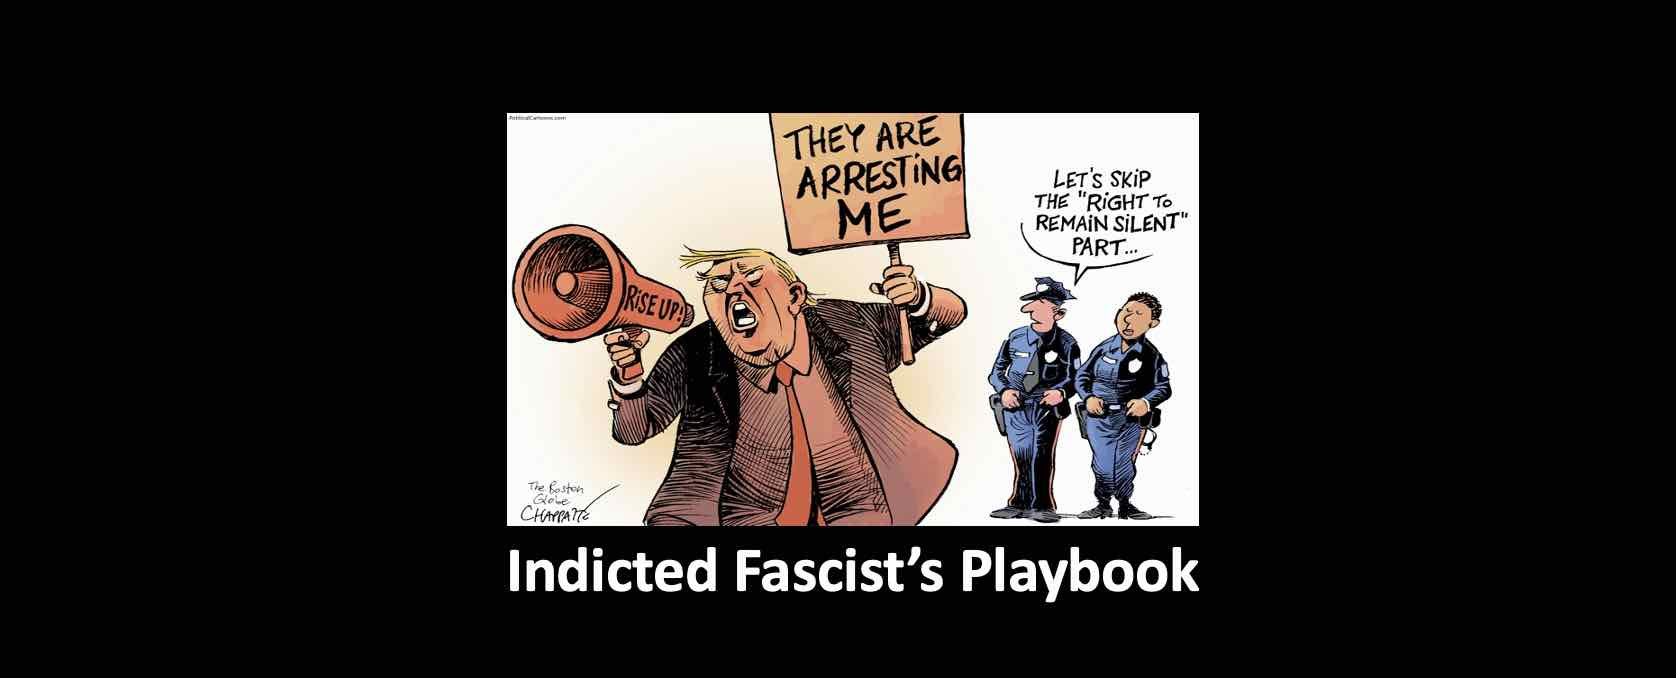 Indicted fascist's playbook.